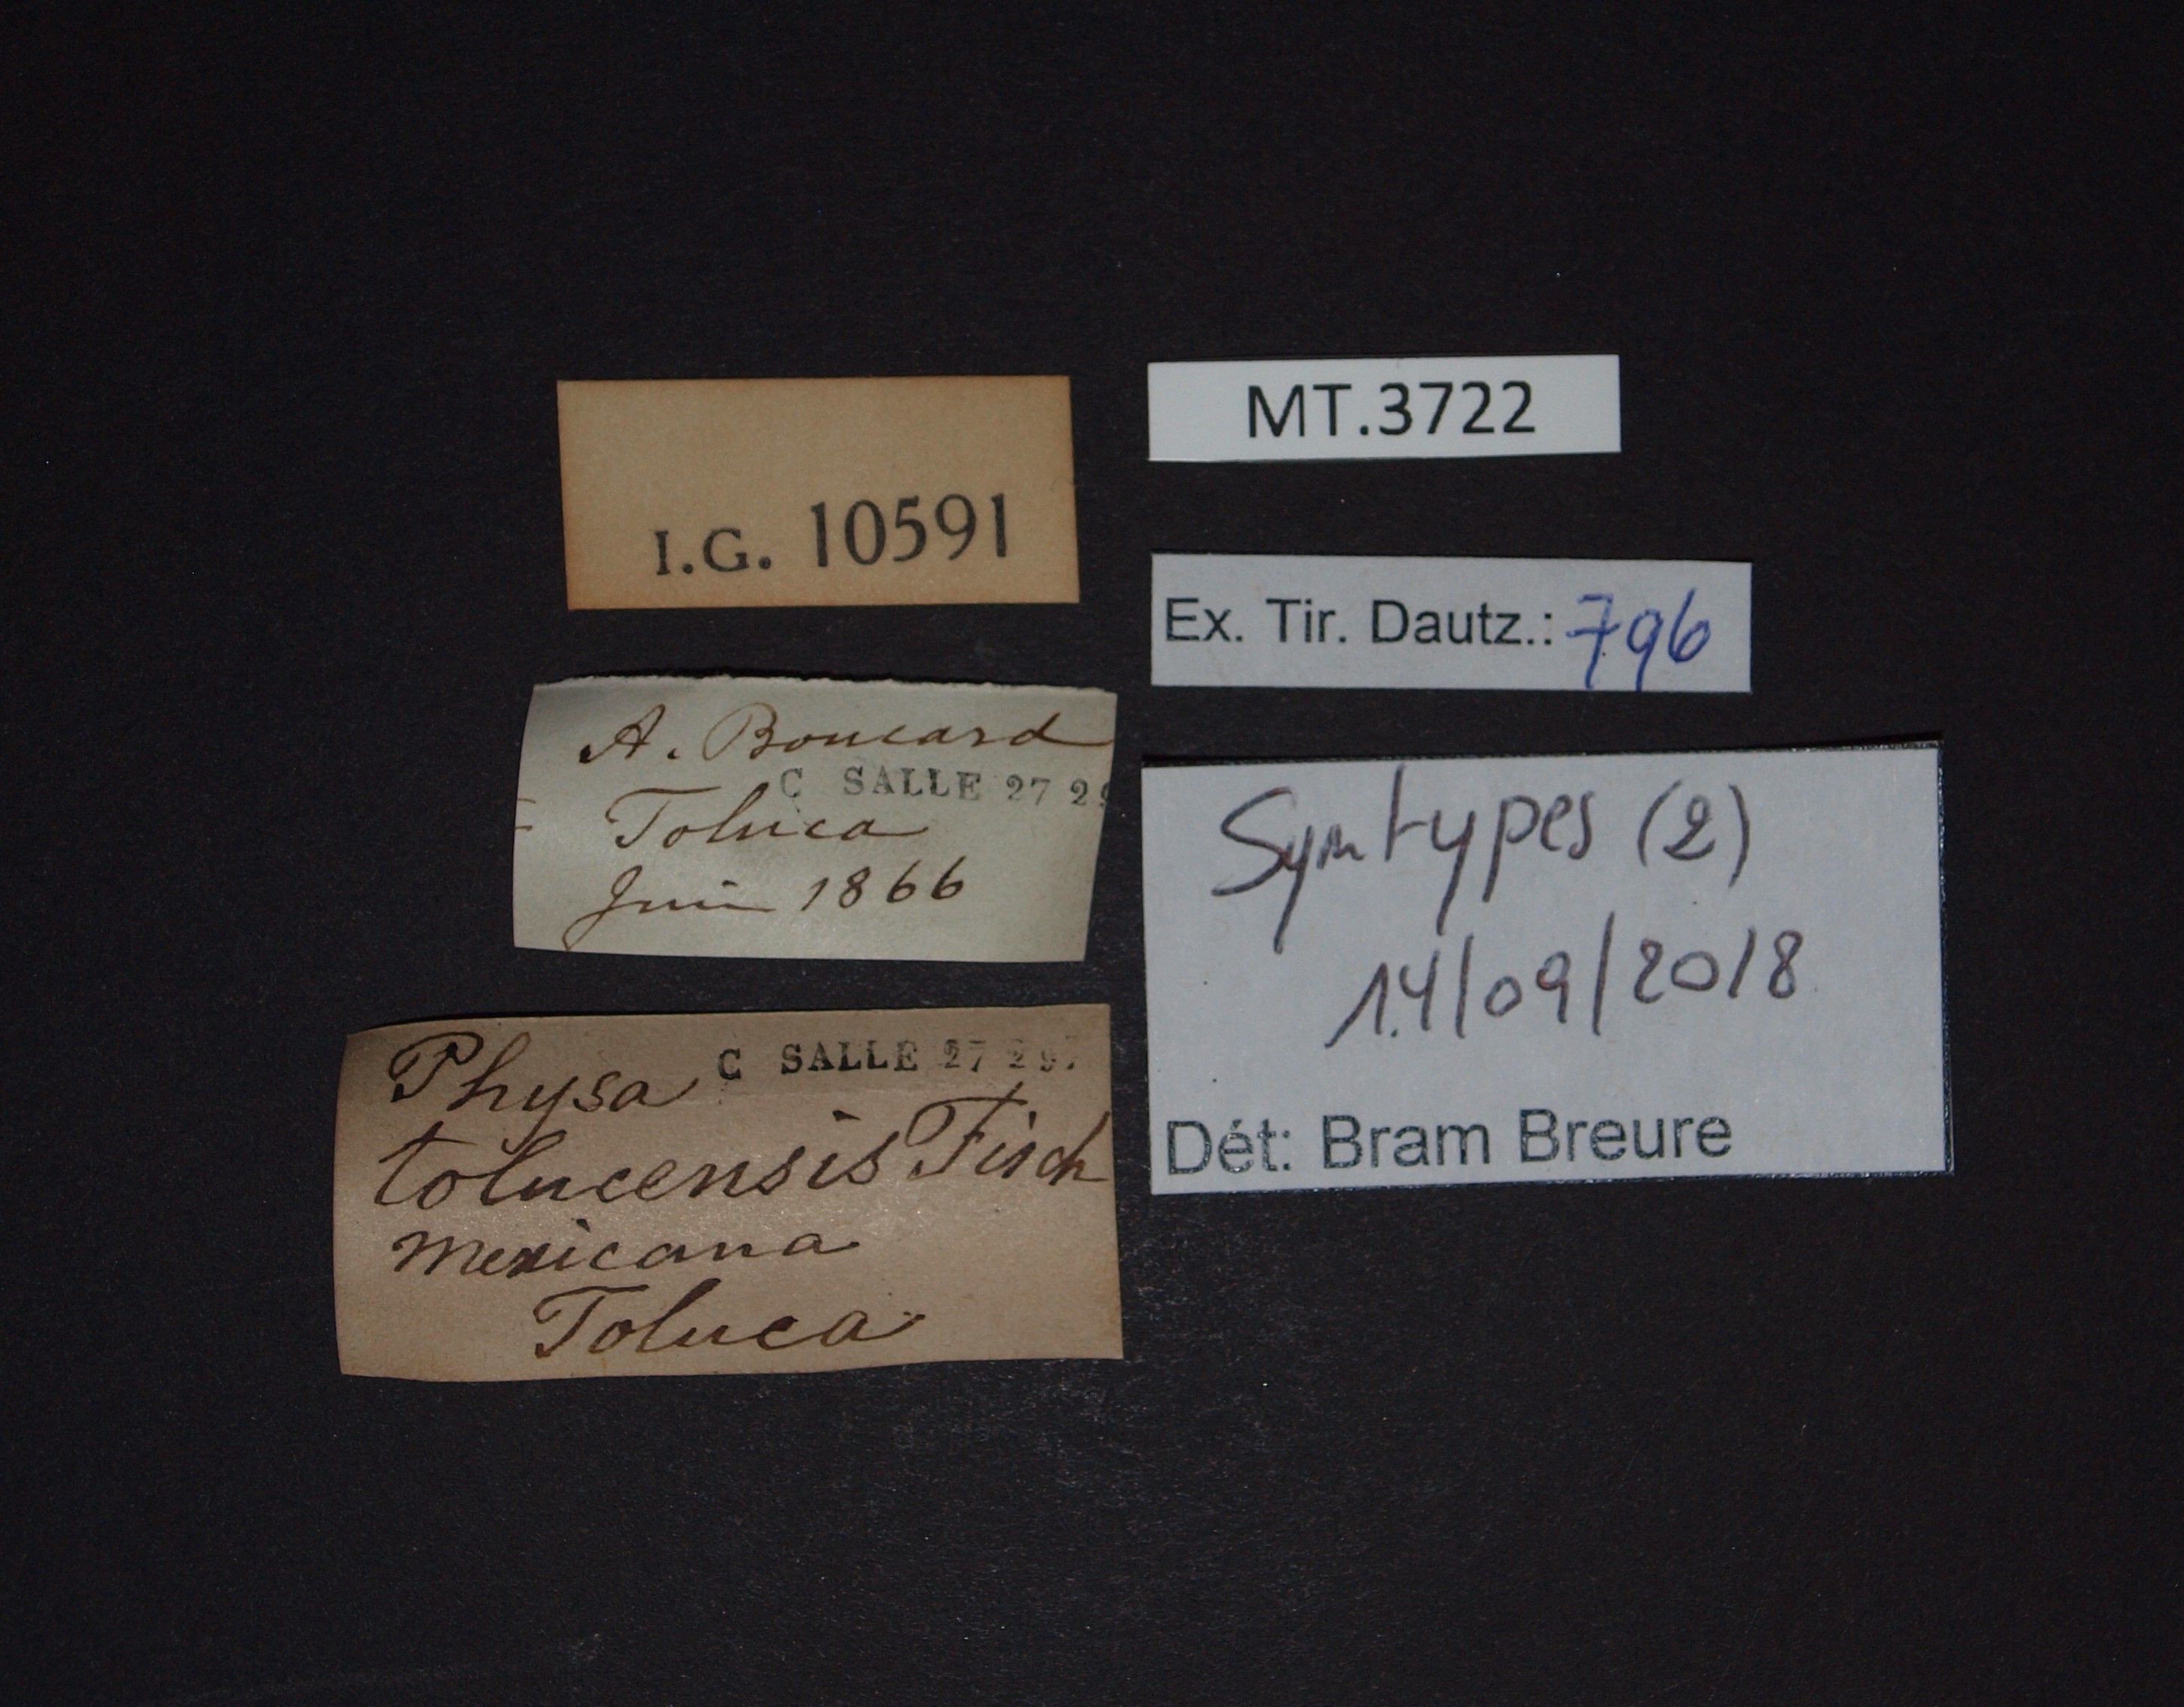 BE-RBINS-INV SYNTYPE MT.3722 Physa mexicana var. tolucensis LABELS.jpg